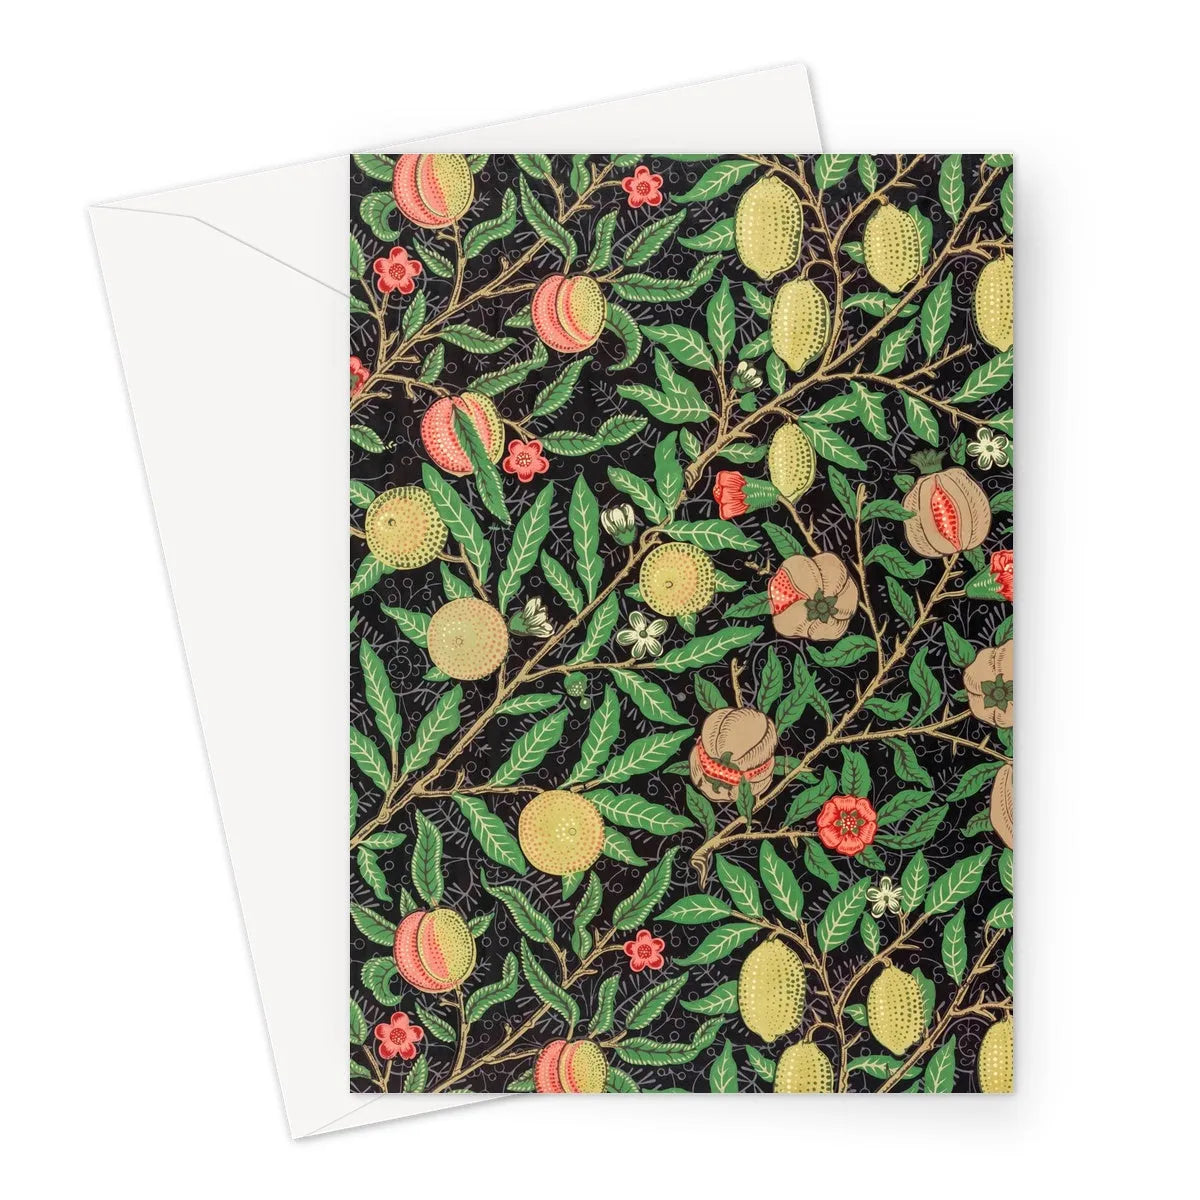 Four Fruits Too - William Morris Greeting Card - A5 Portrait / 1 Card - Greeting & Note Cards - Aesthetic Art